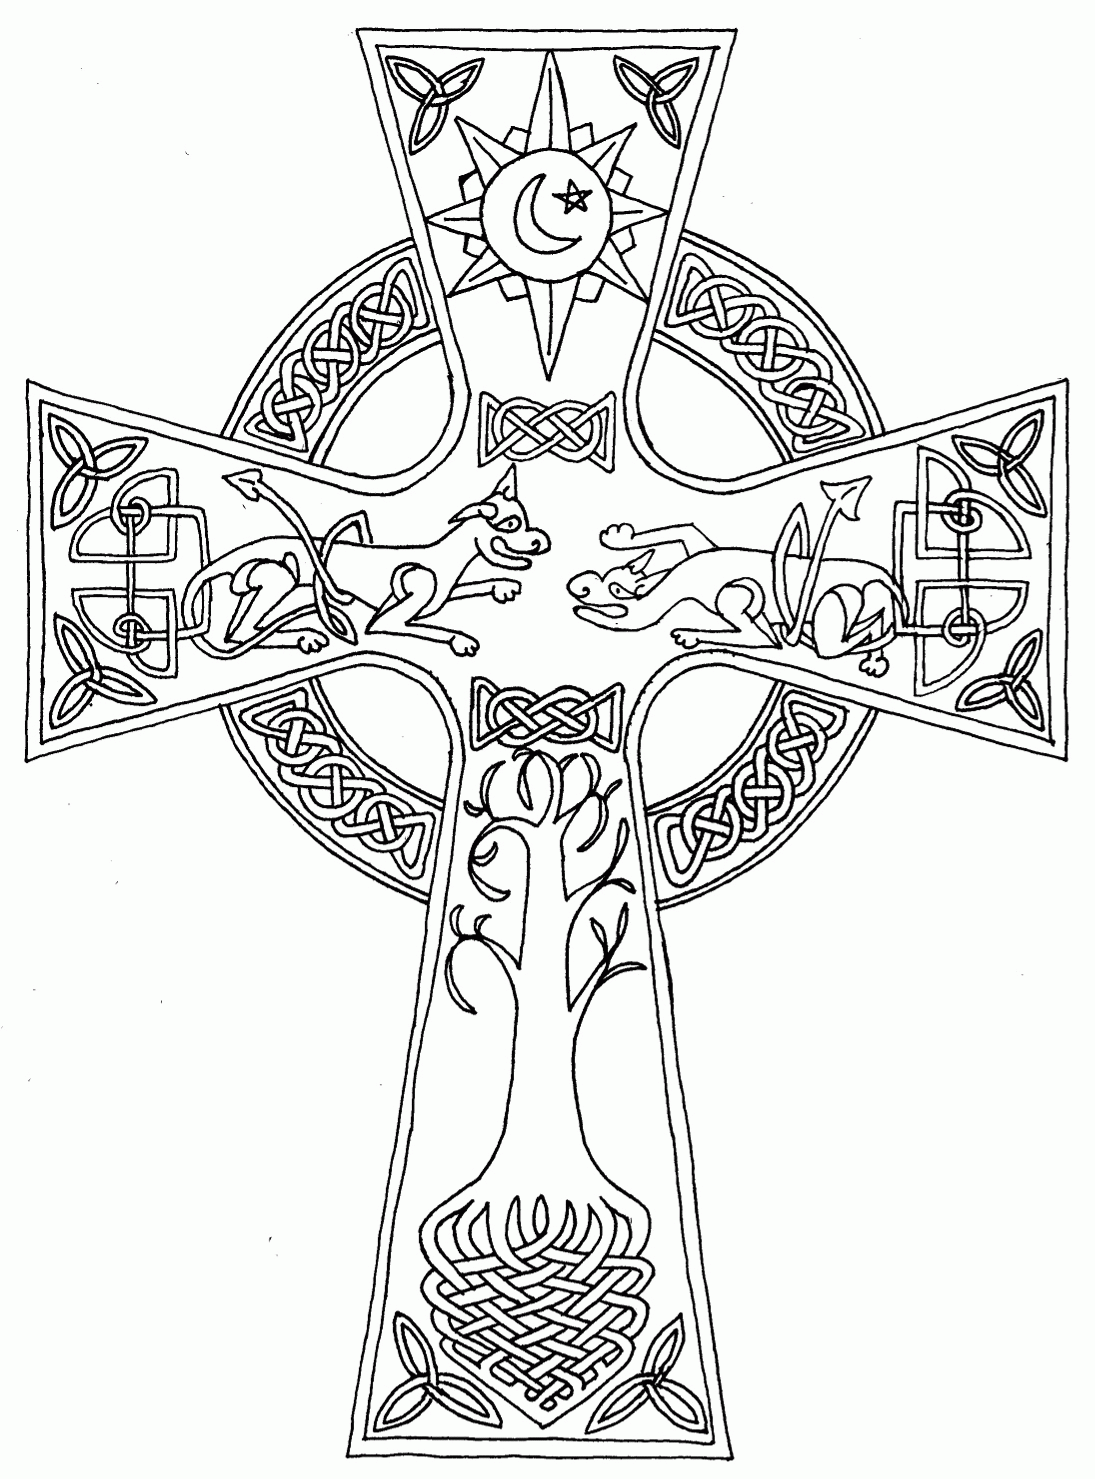 Celtic Design Art Coloring Pages - Coloring Pages For All Ages